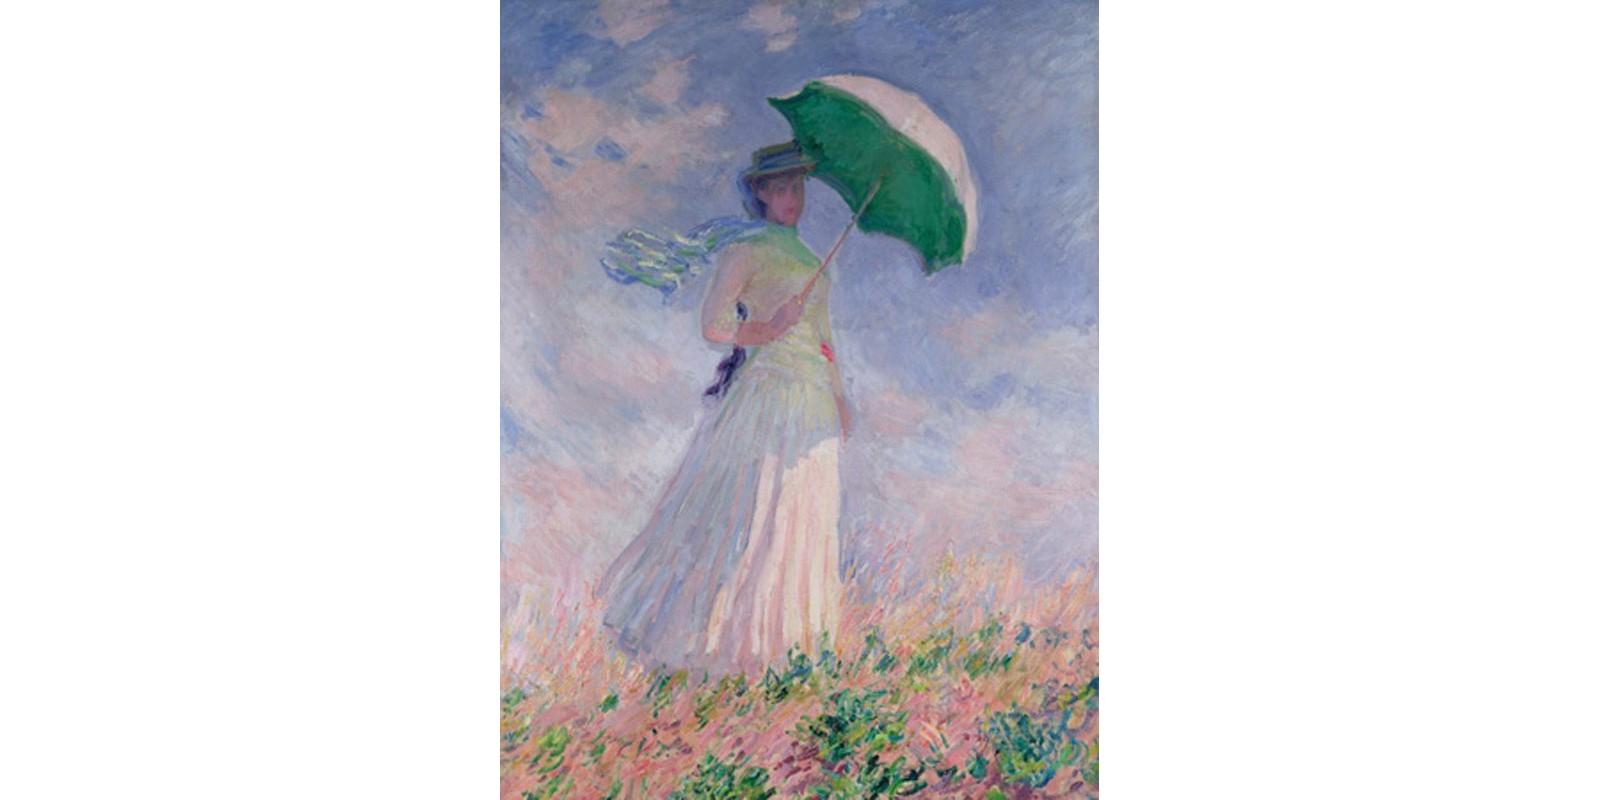 Claude Monet - Woman with a Parasol (Right)